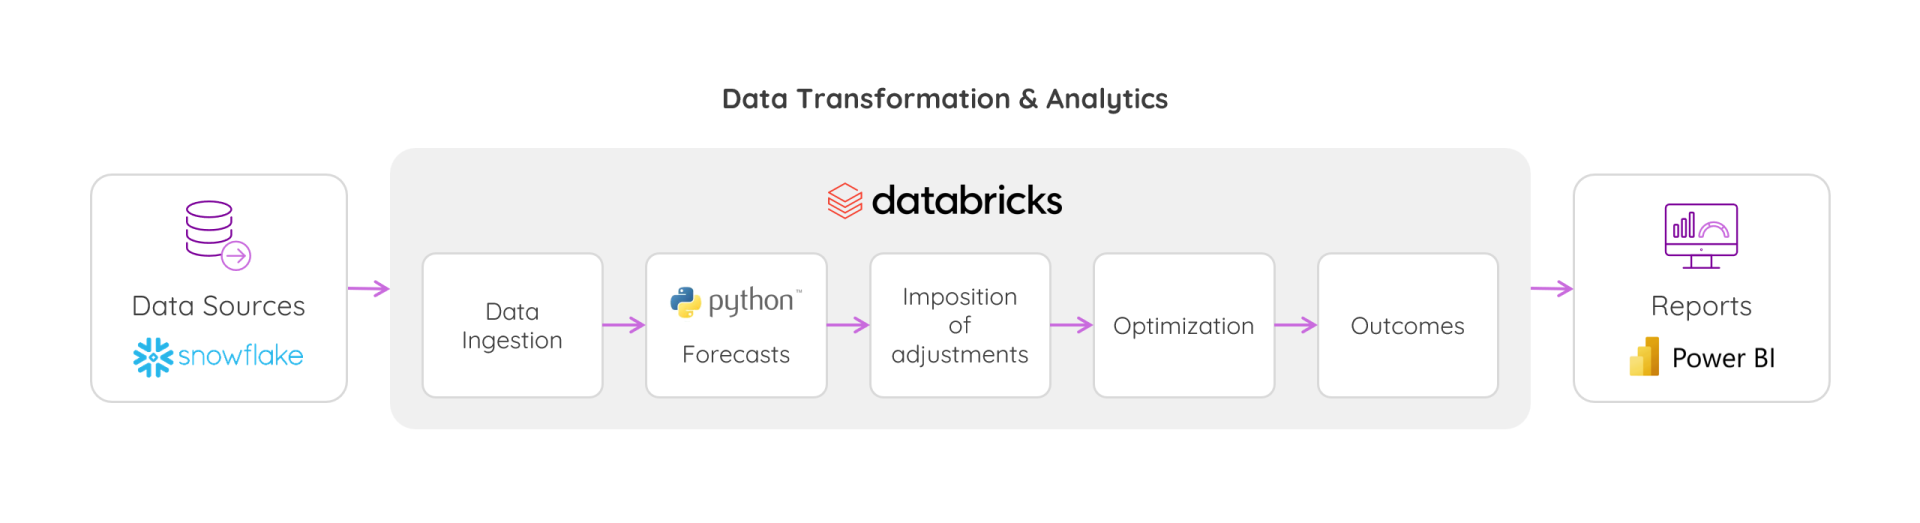 The process of transforming data into Power BI reports: from data ingestion through their transformation by Databricks, to Power BI dashboard